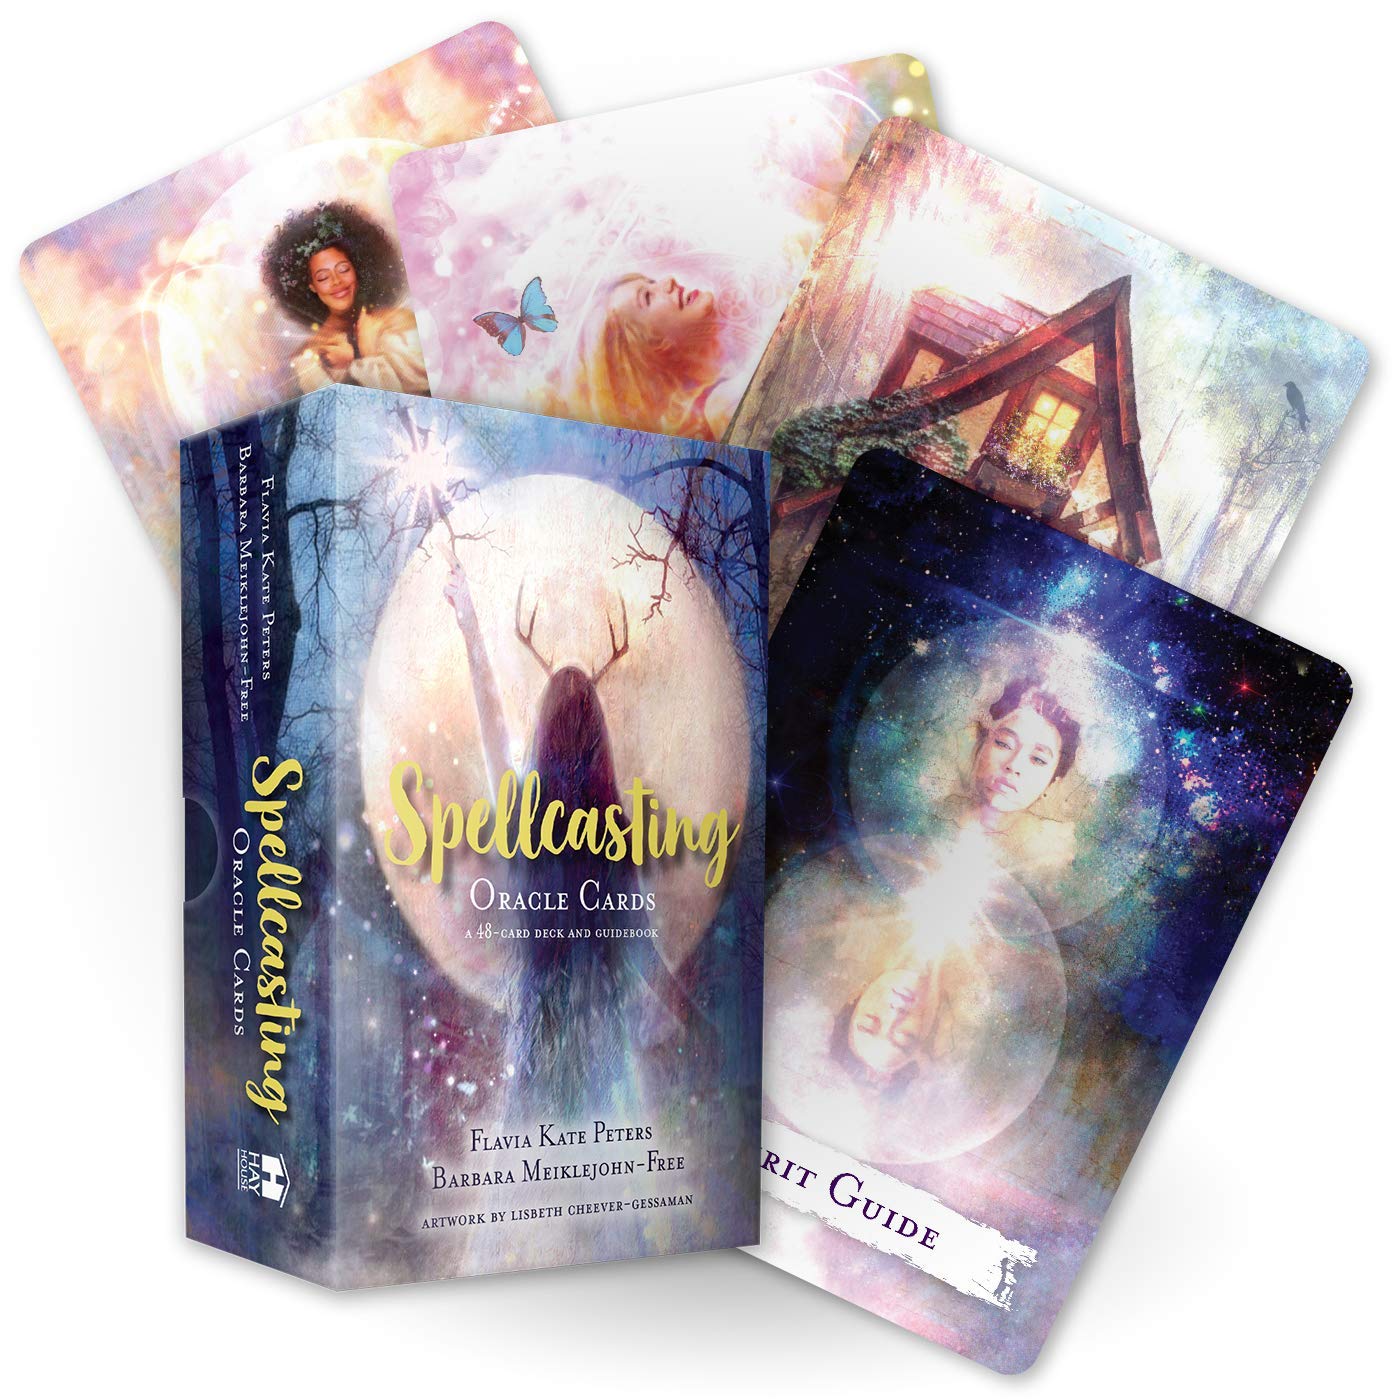 Discover how to work with moon phases, specific weekdays and candle magic, in conjunction with unwavering focus and intent, though invocation and incantations. Each spell offers empowerment and freedom, through the spellbinding act of transcendence, as you harness natural magic to positively enhance your life. A 48-Card Deck and Guidebook is included.